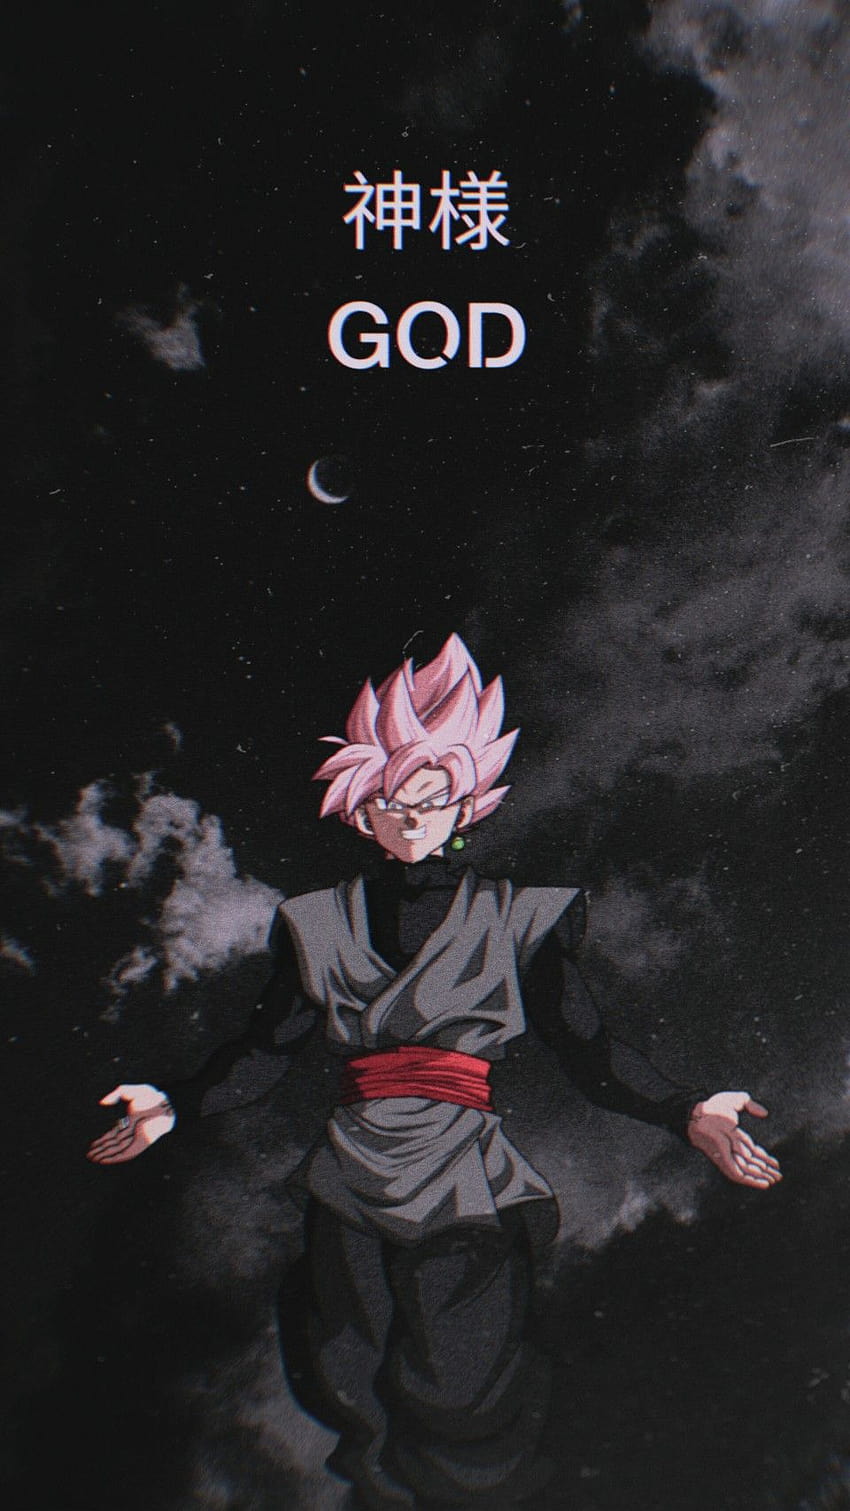 Goku Black Iphone posted by Christopher Anderson, aesthetic black goku HD phone wallpaper